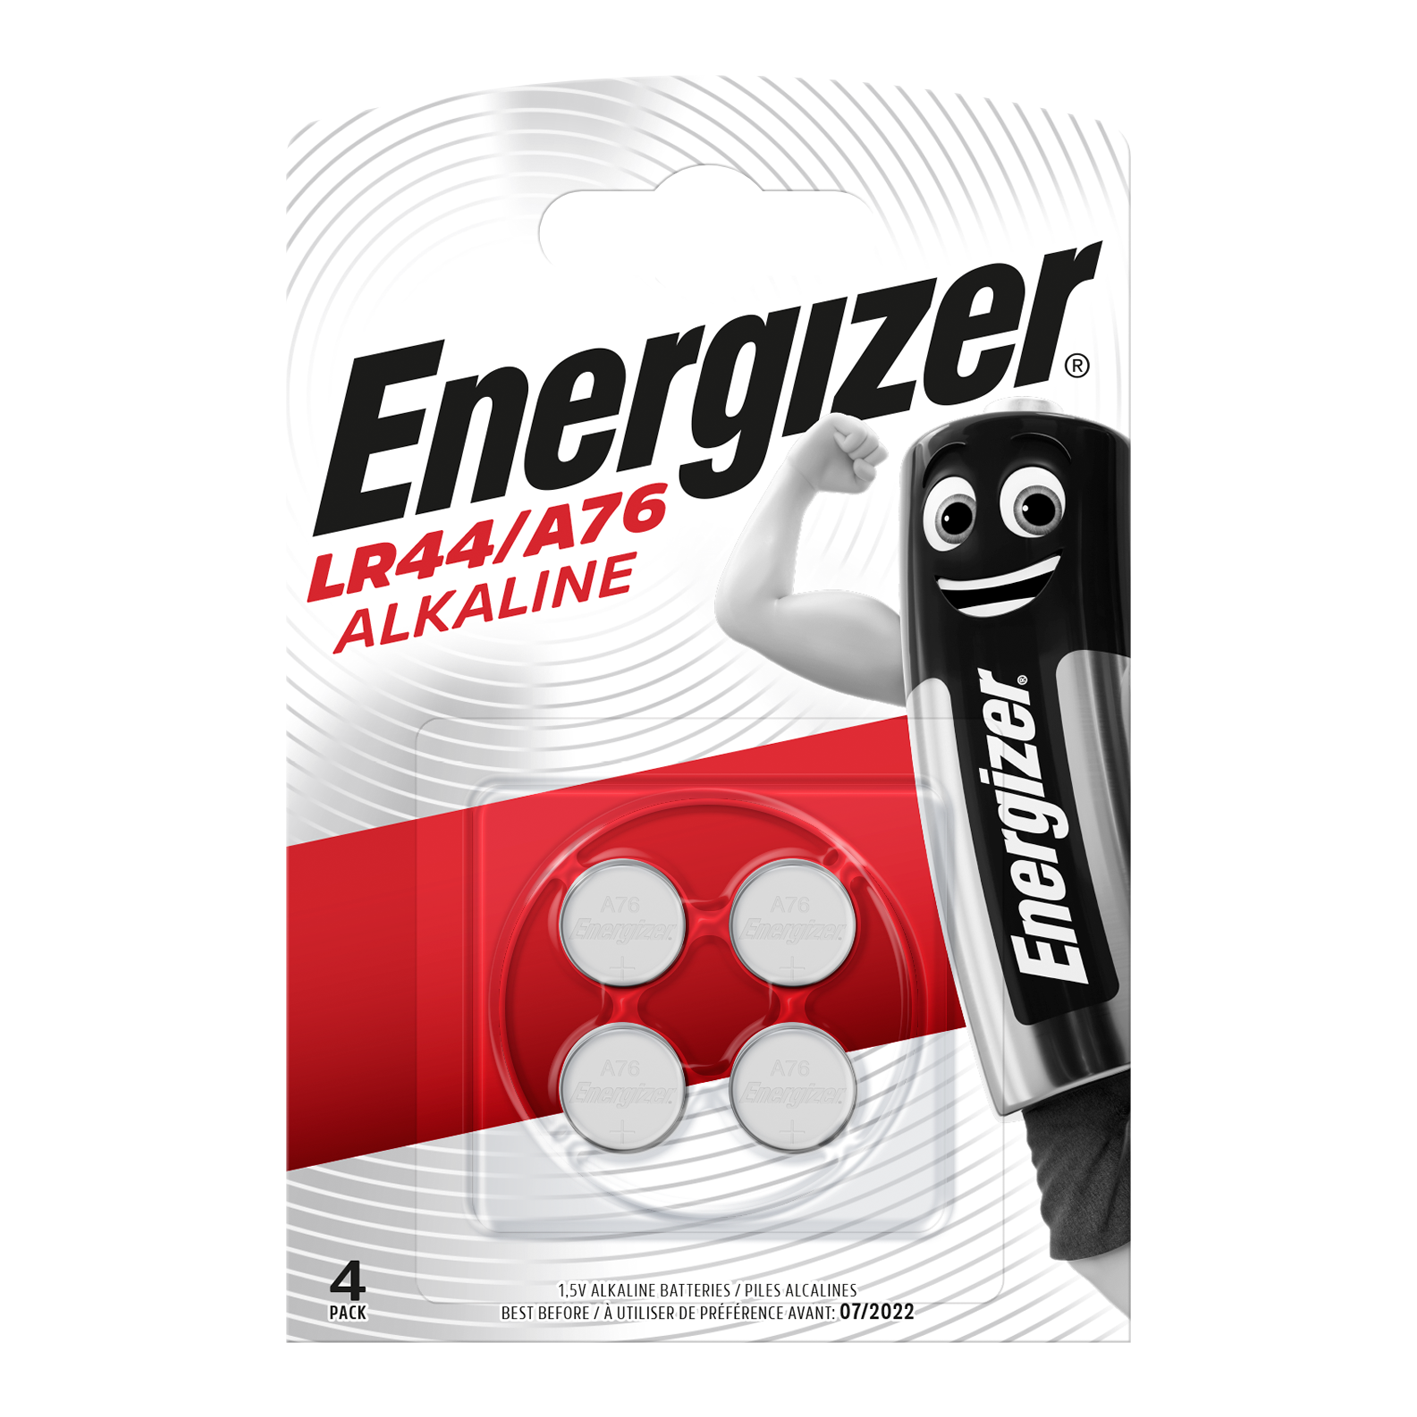 Energizer LR44/A76 Alkaline Coin Cell, Pack of 4